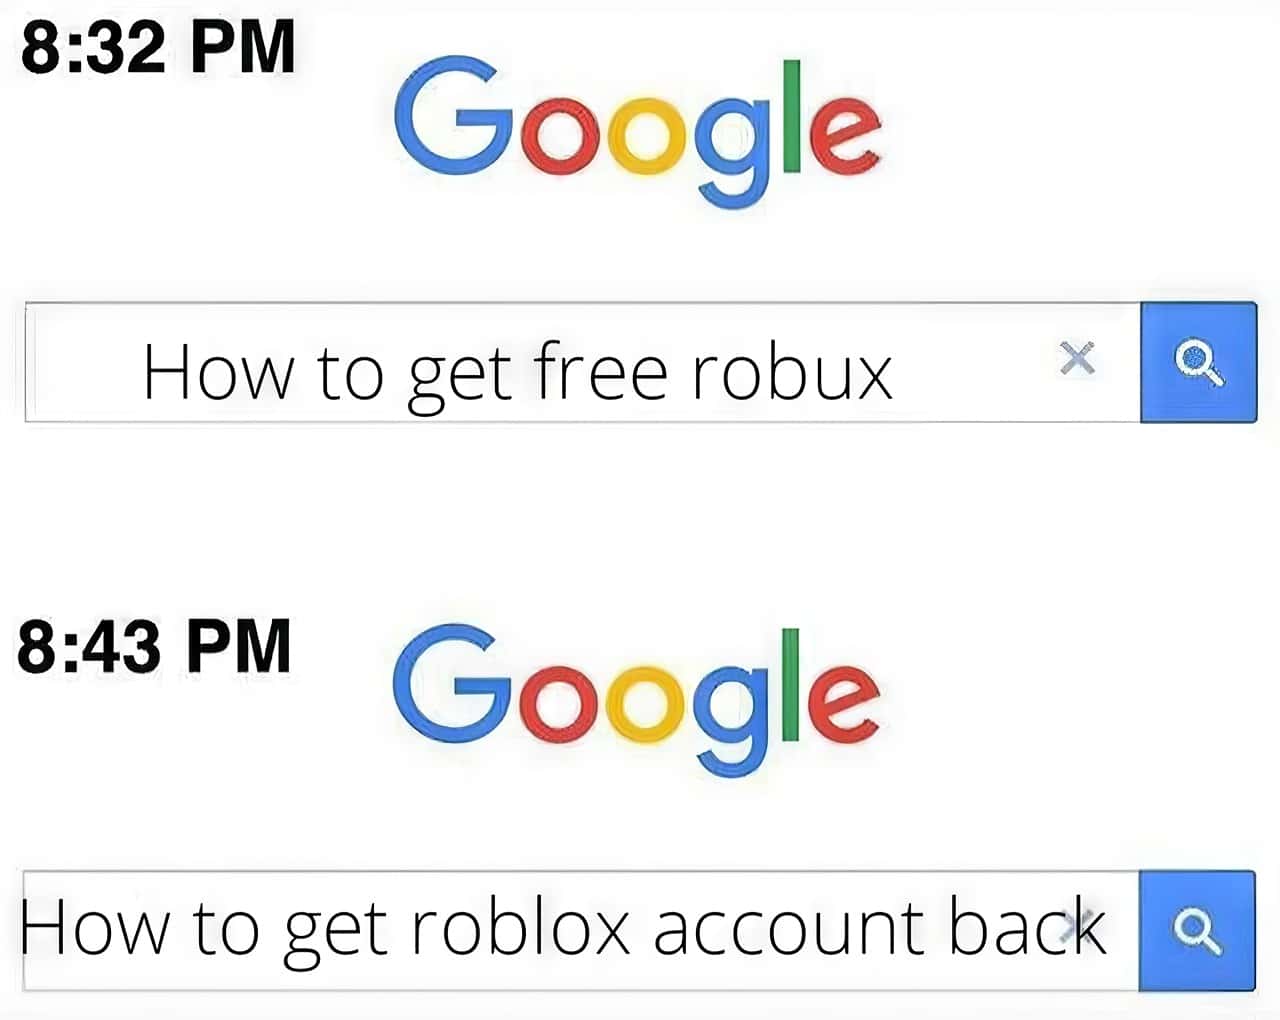 6 Funny Roblox Memes: A Compilation Of Hilarious Memes From The Roblox  Universe